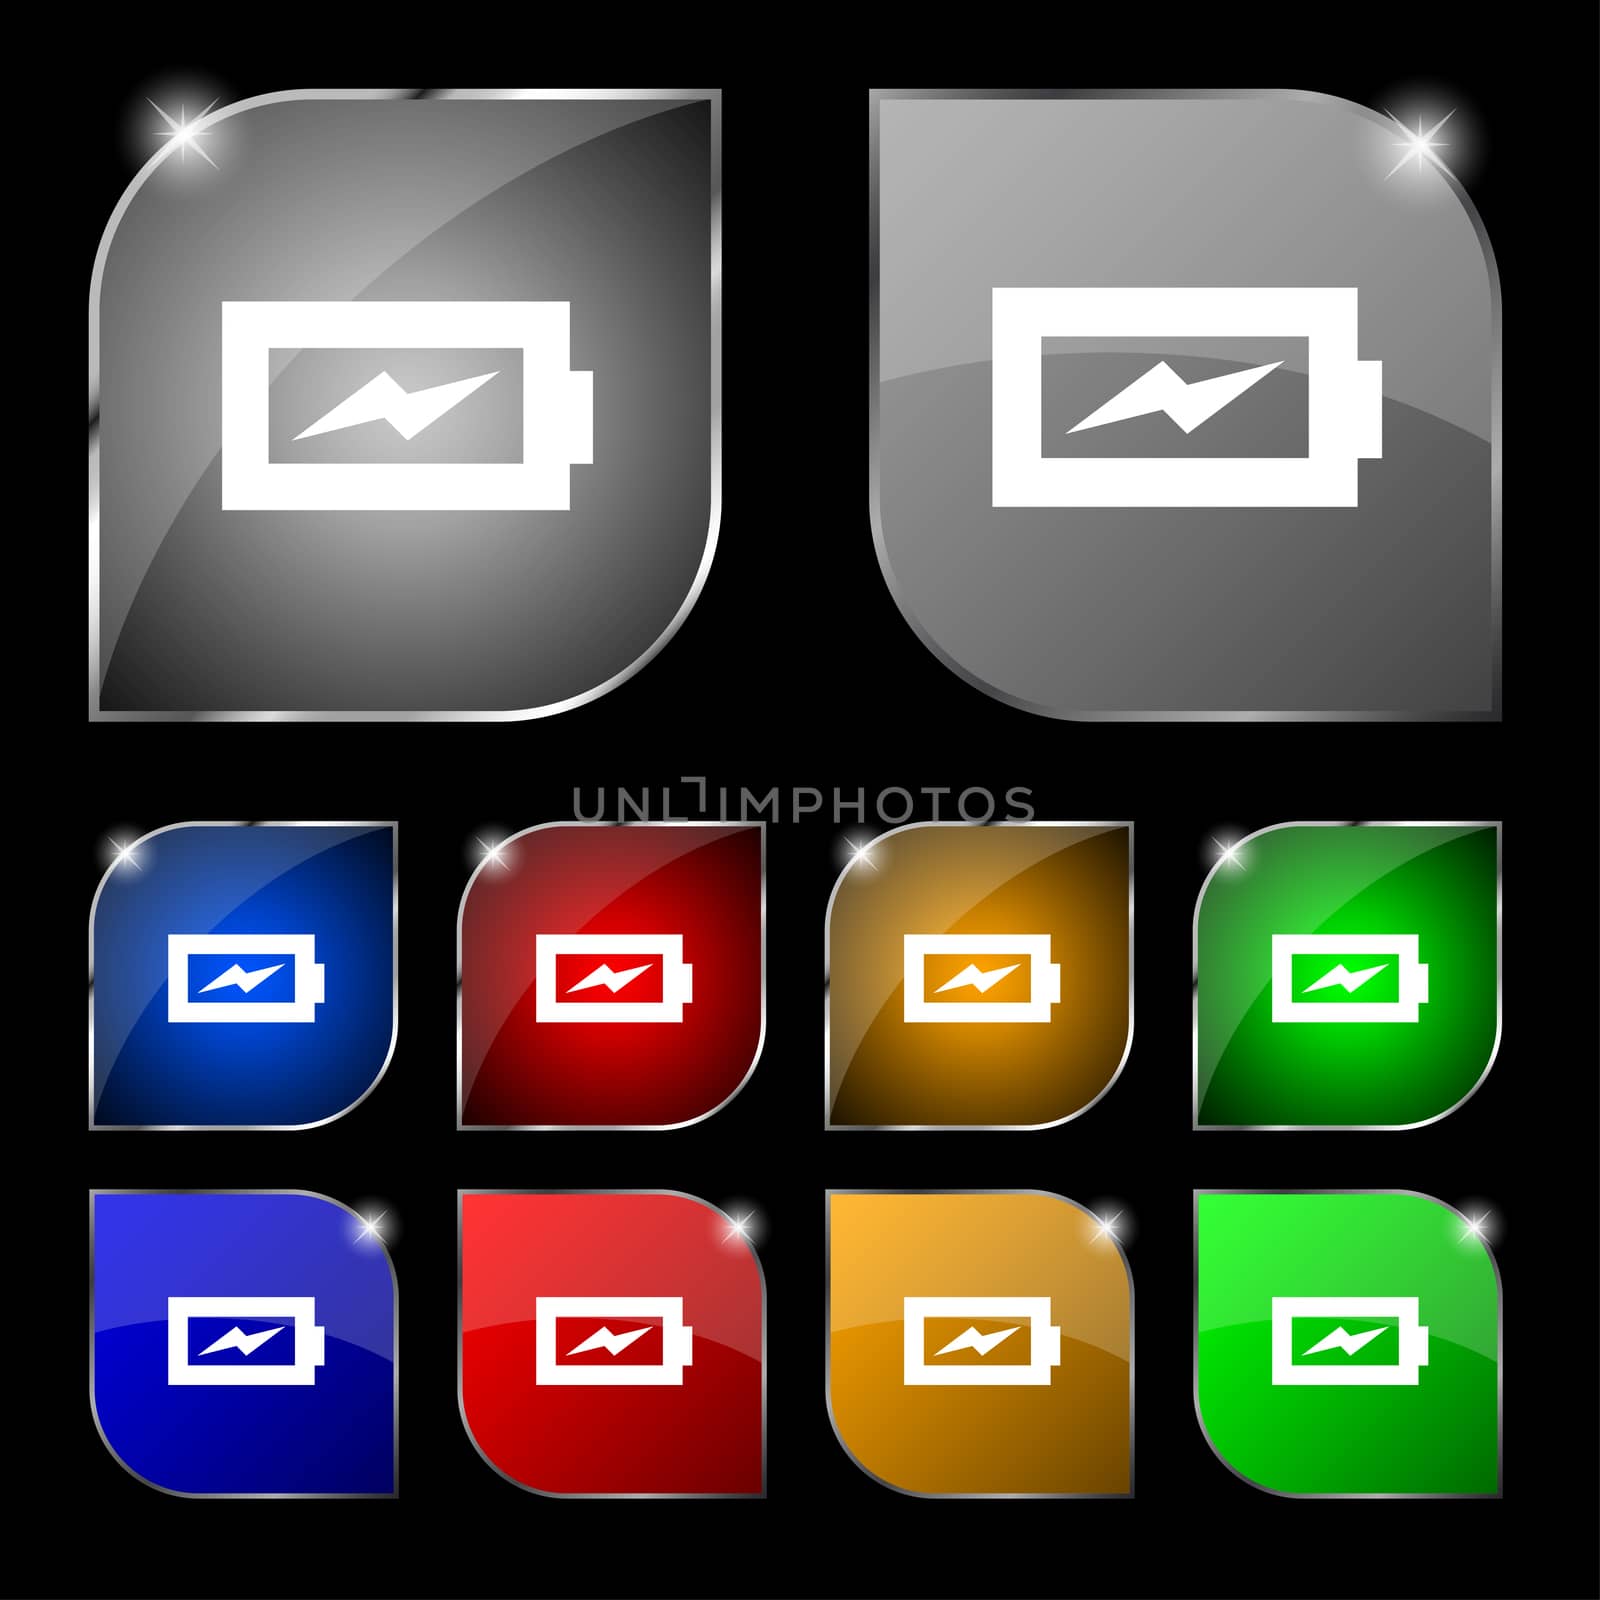 Battery charging icon sign. Set of ten colorful buttons with glare. illustration